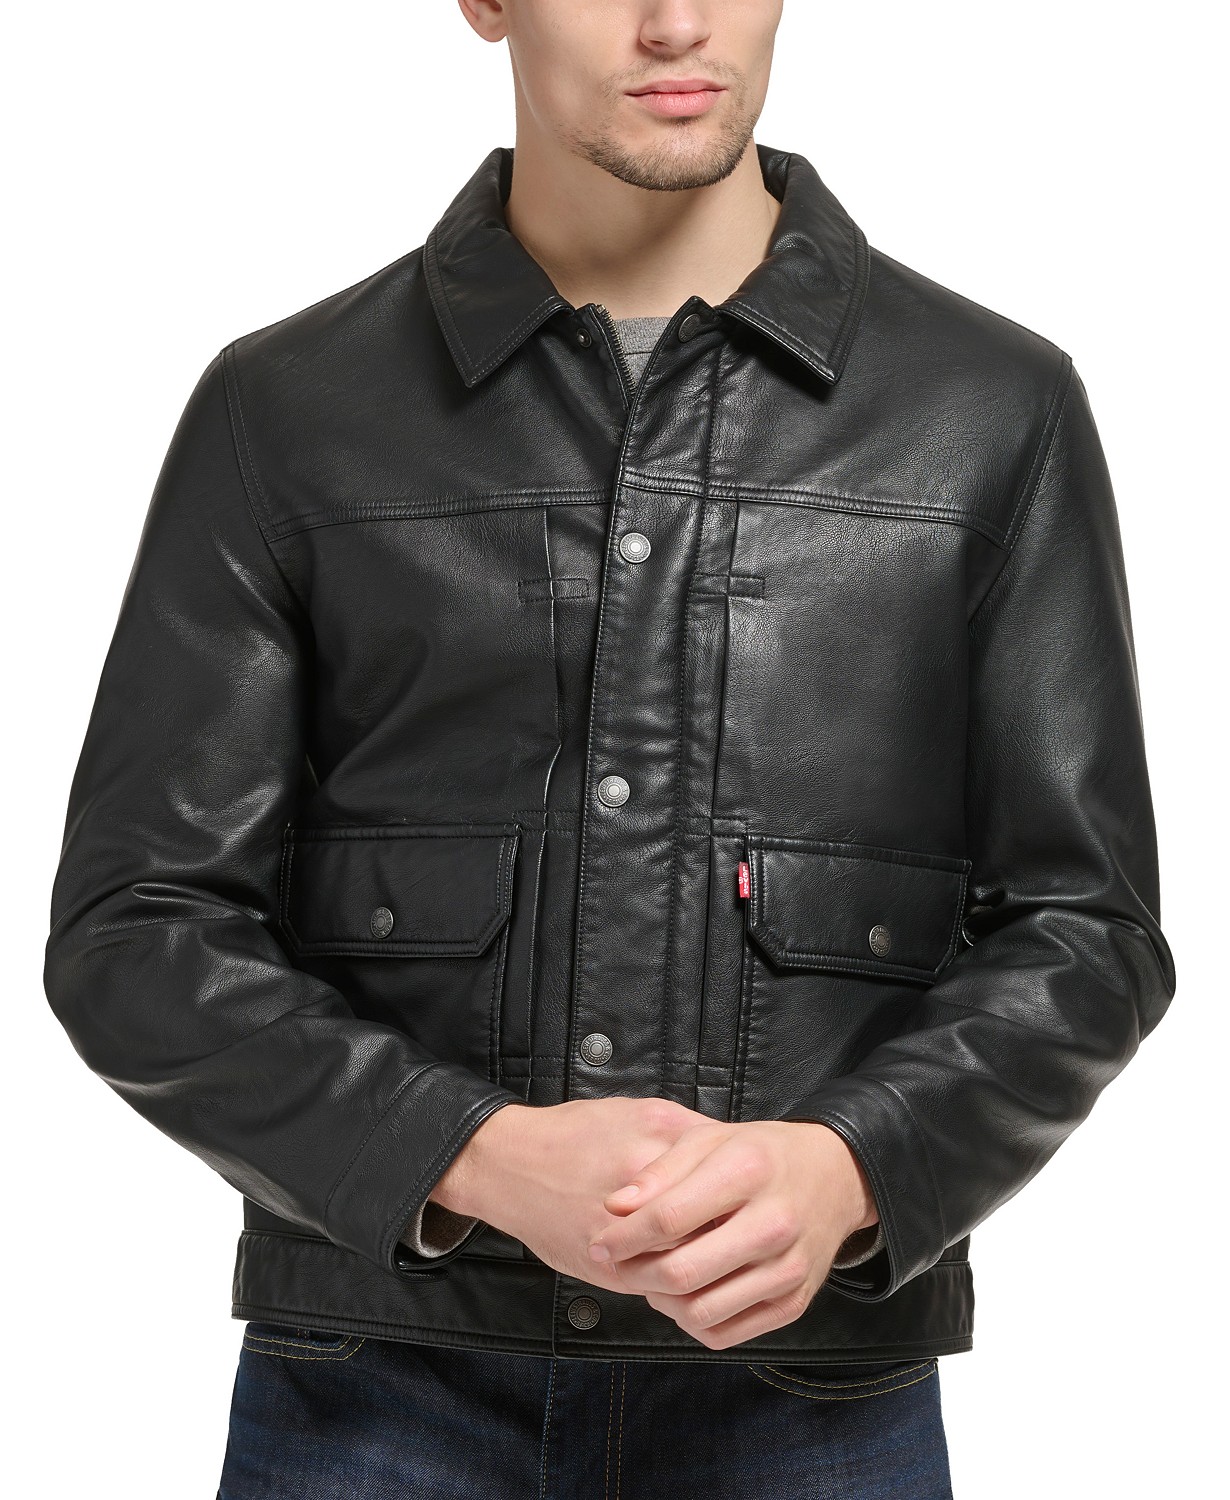 Mens Faux Leather Snap-Front Water-Resistant Jacket